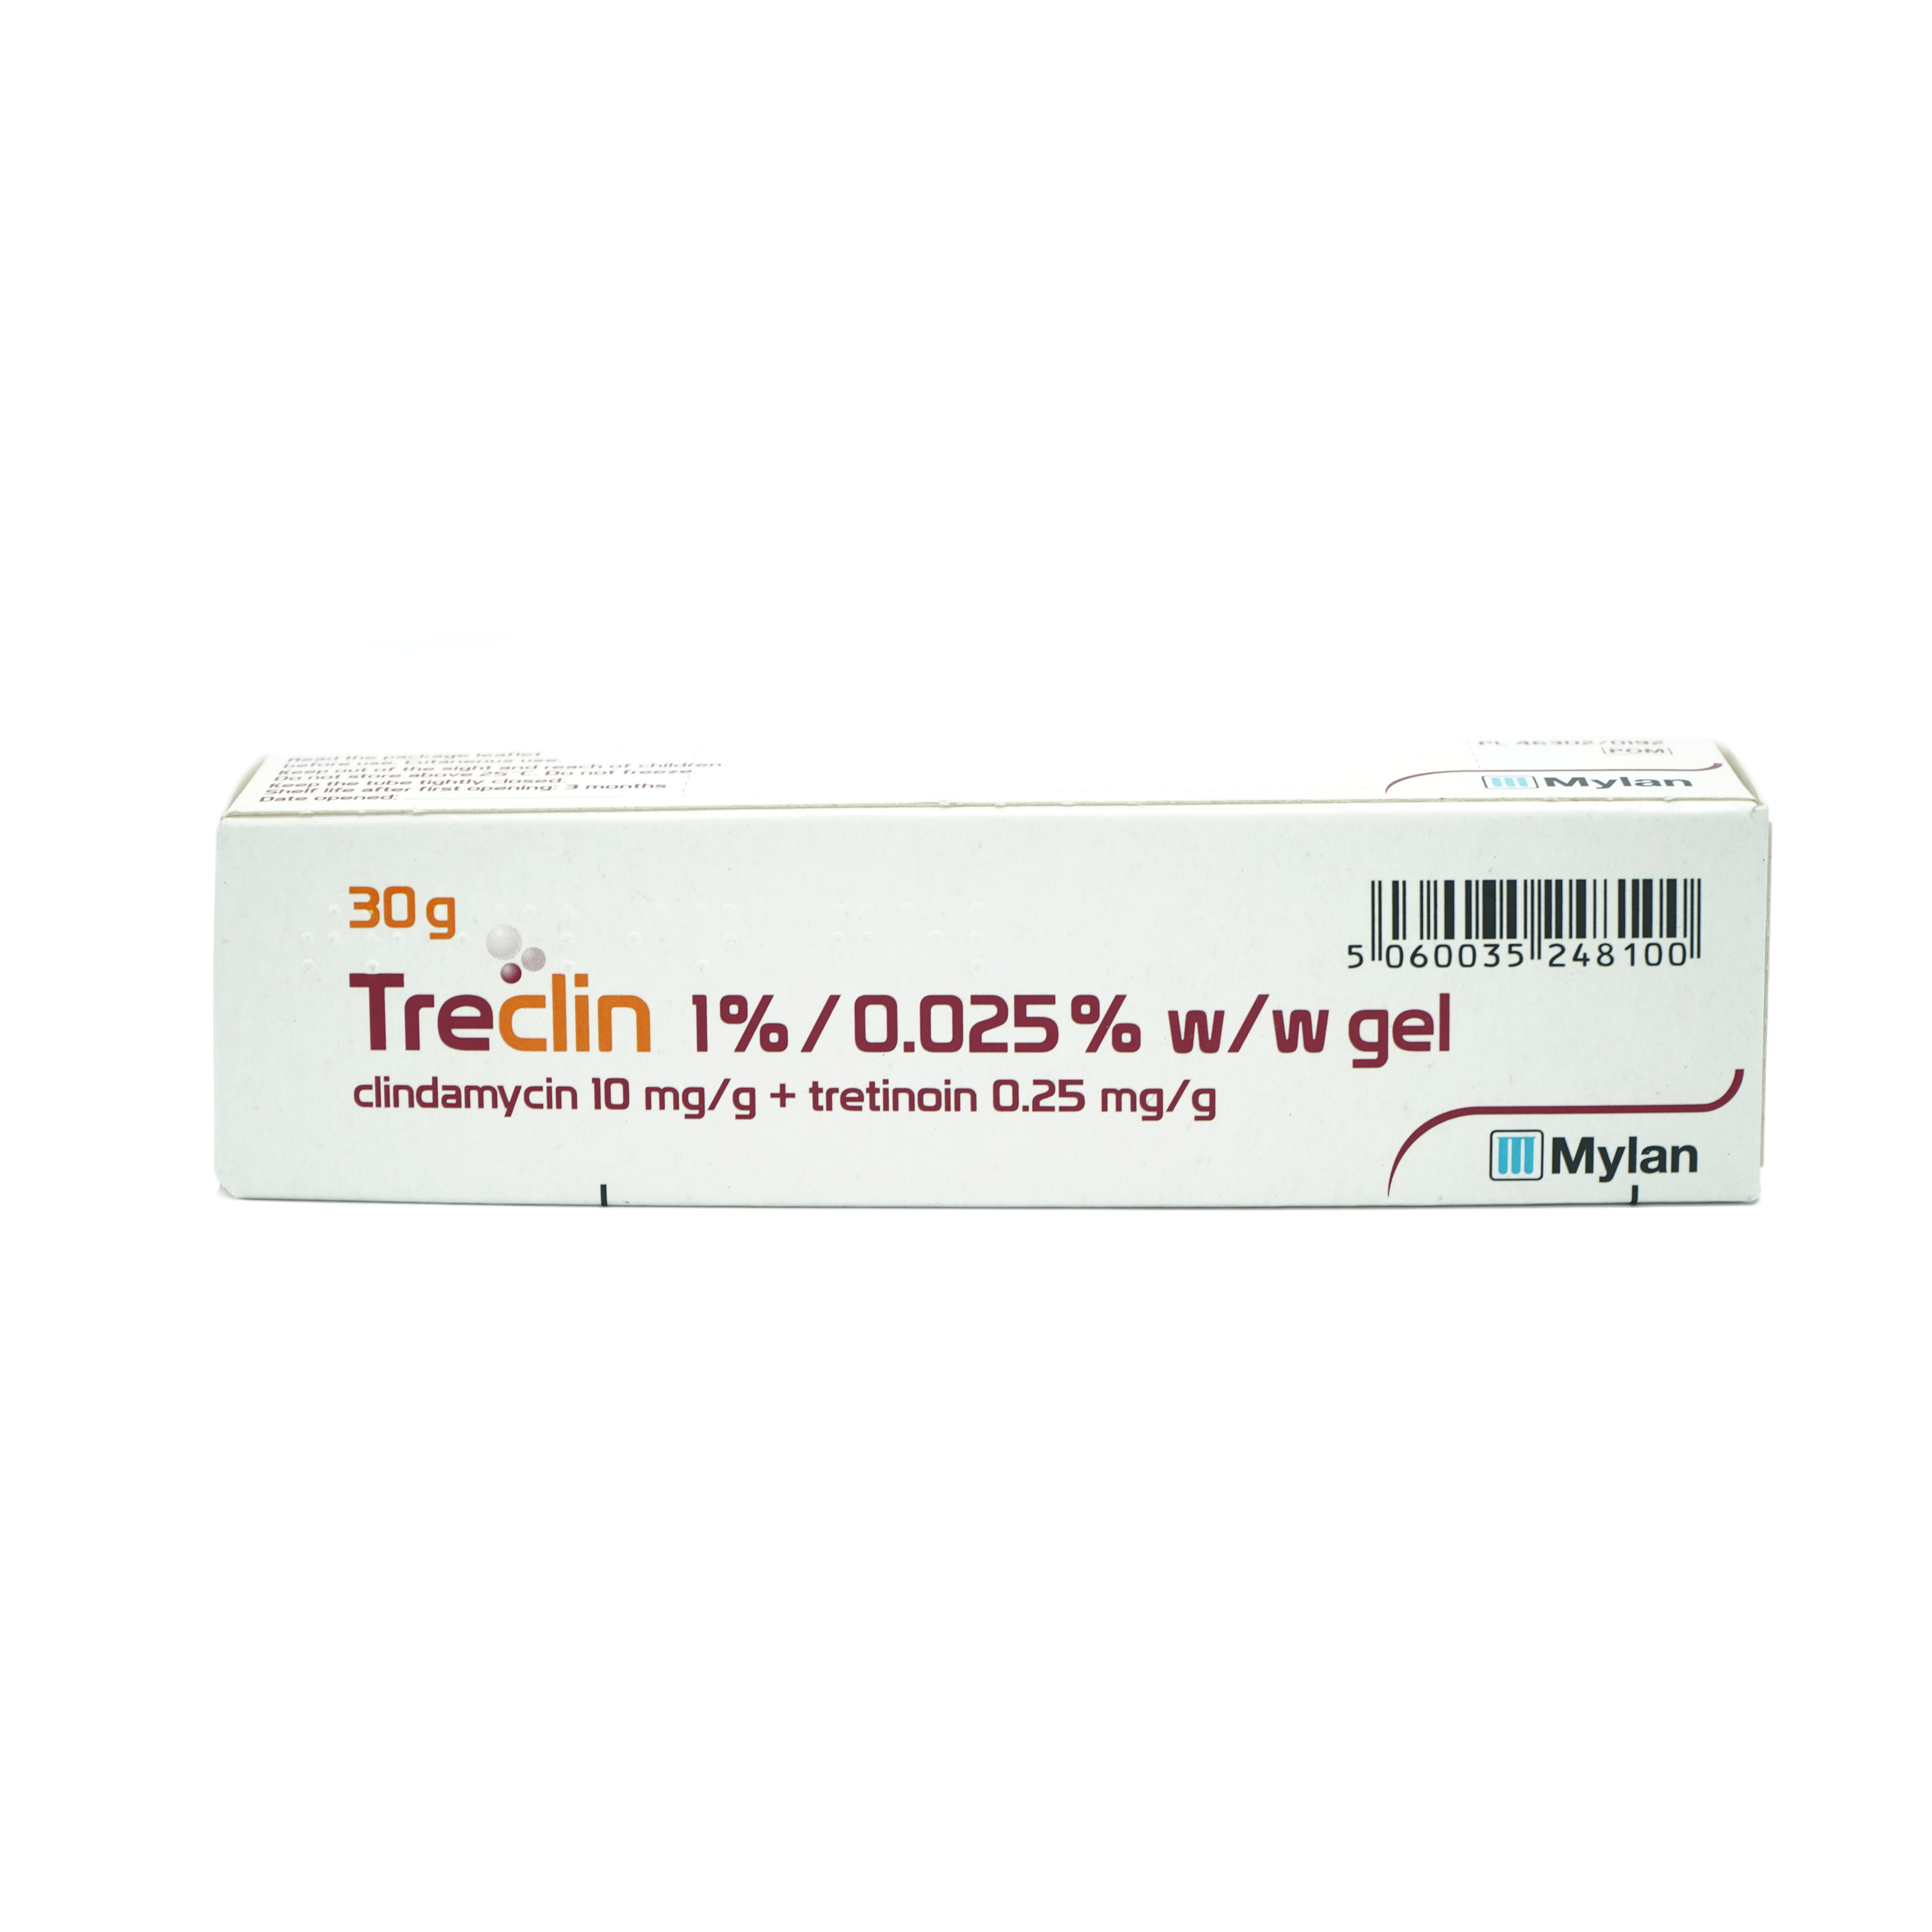 The front of a box of Treclin gel